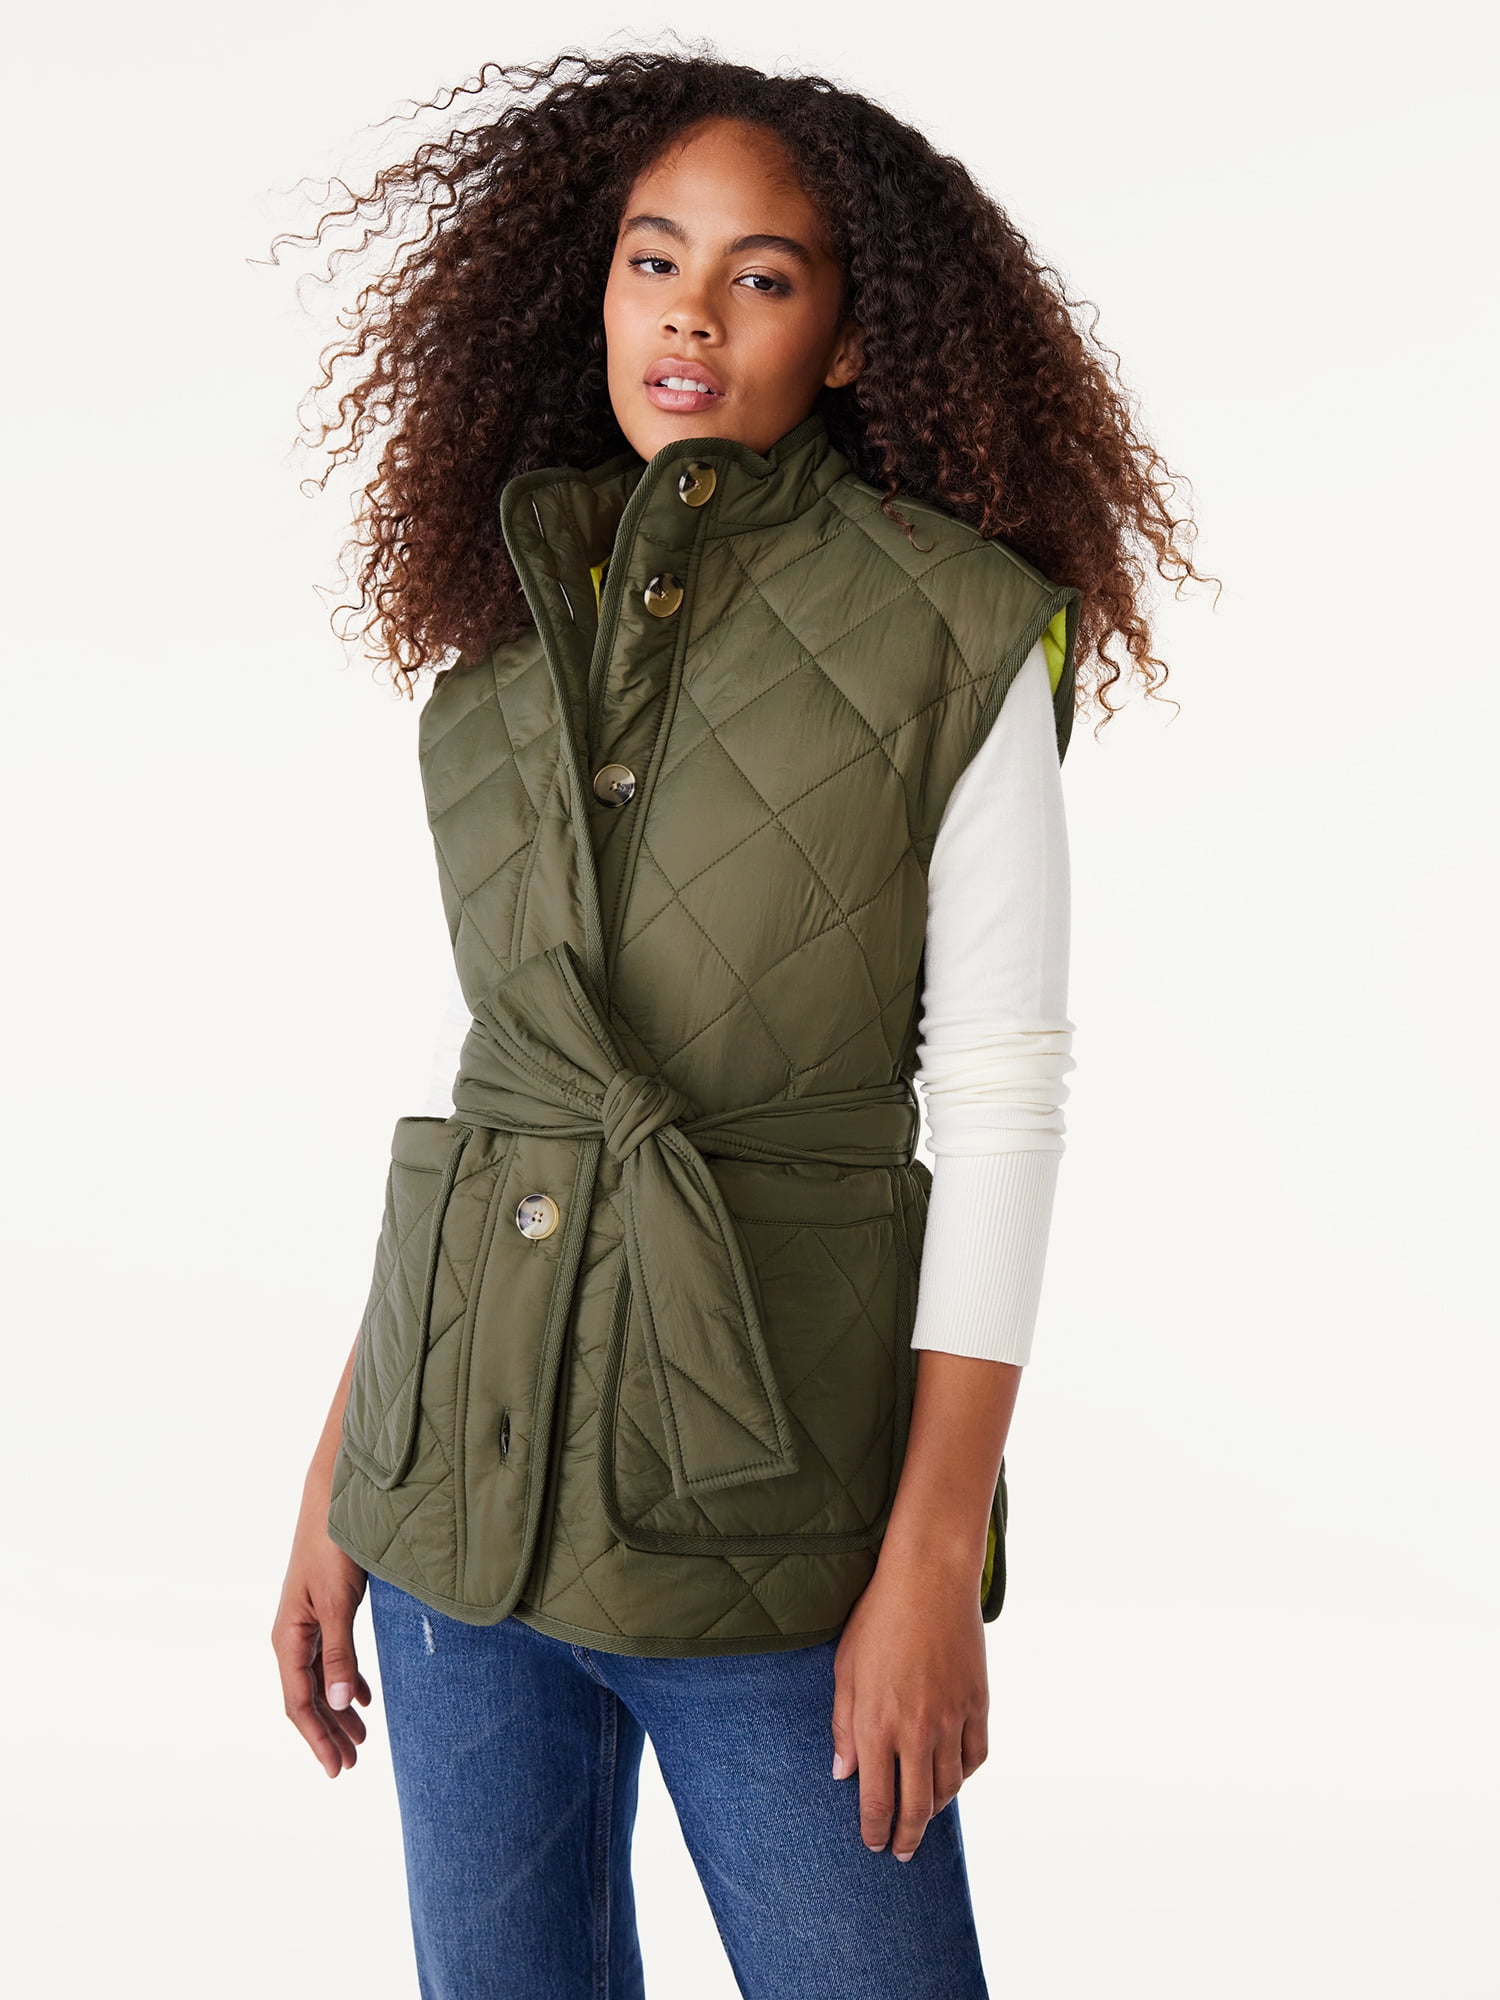 Free Assembly Women's Quilted Vest with Belt, Sizes XS-XXL - Walmart.com